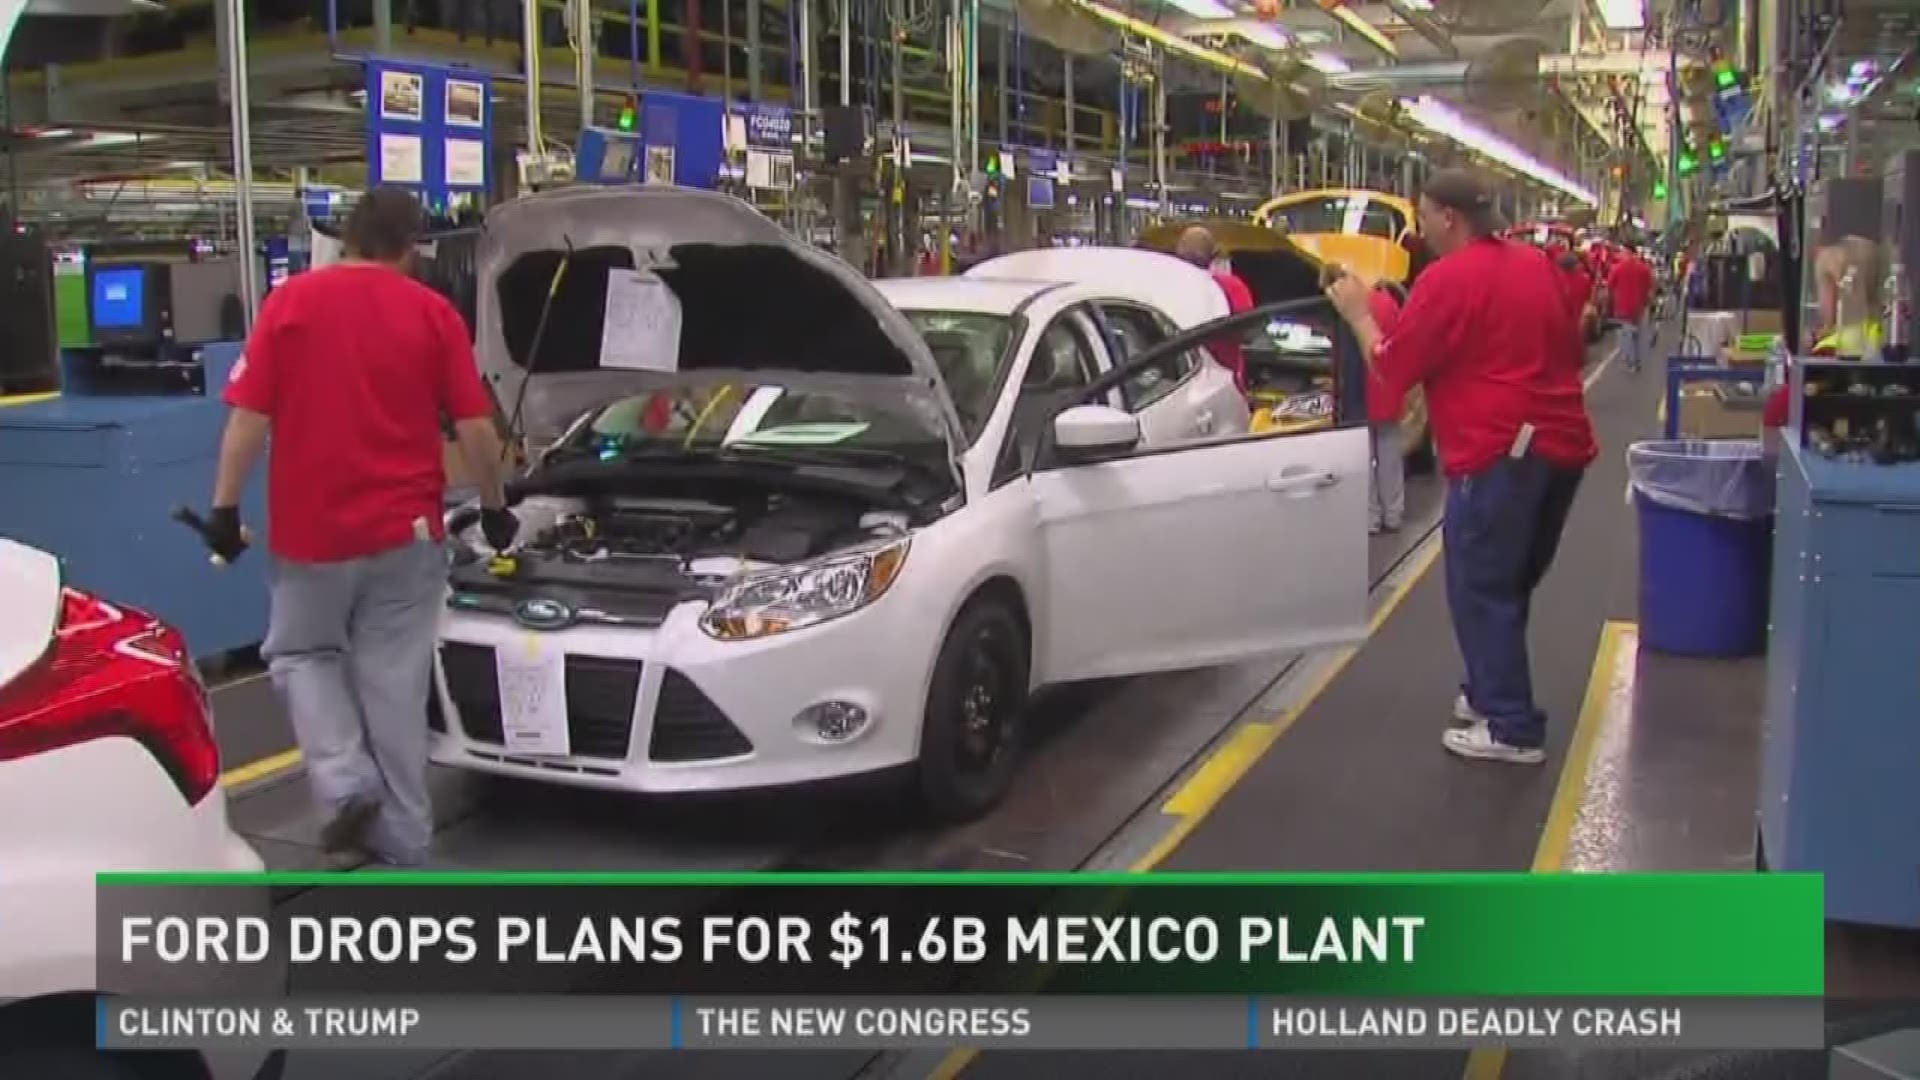 Ford Motor Company executives say they are dropping plans to build a $1.6 billion assembly plant in Mexico.